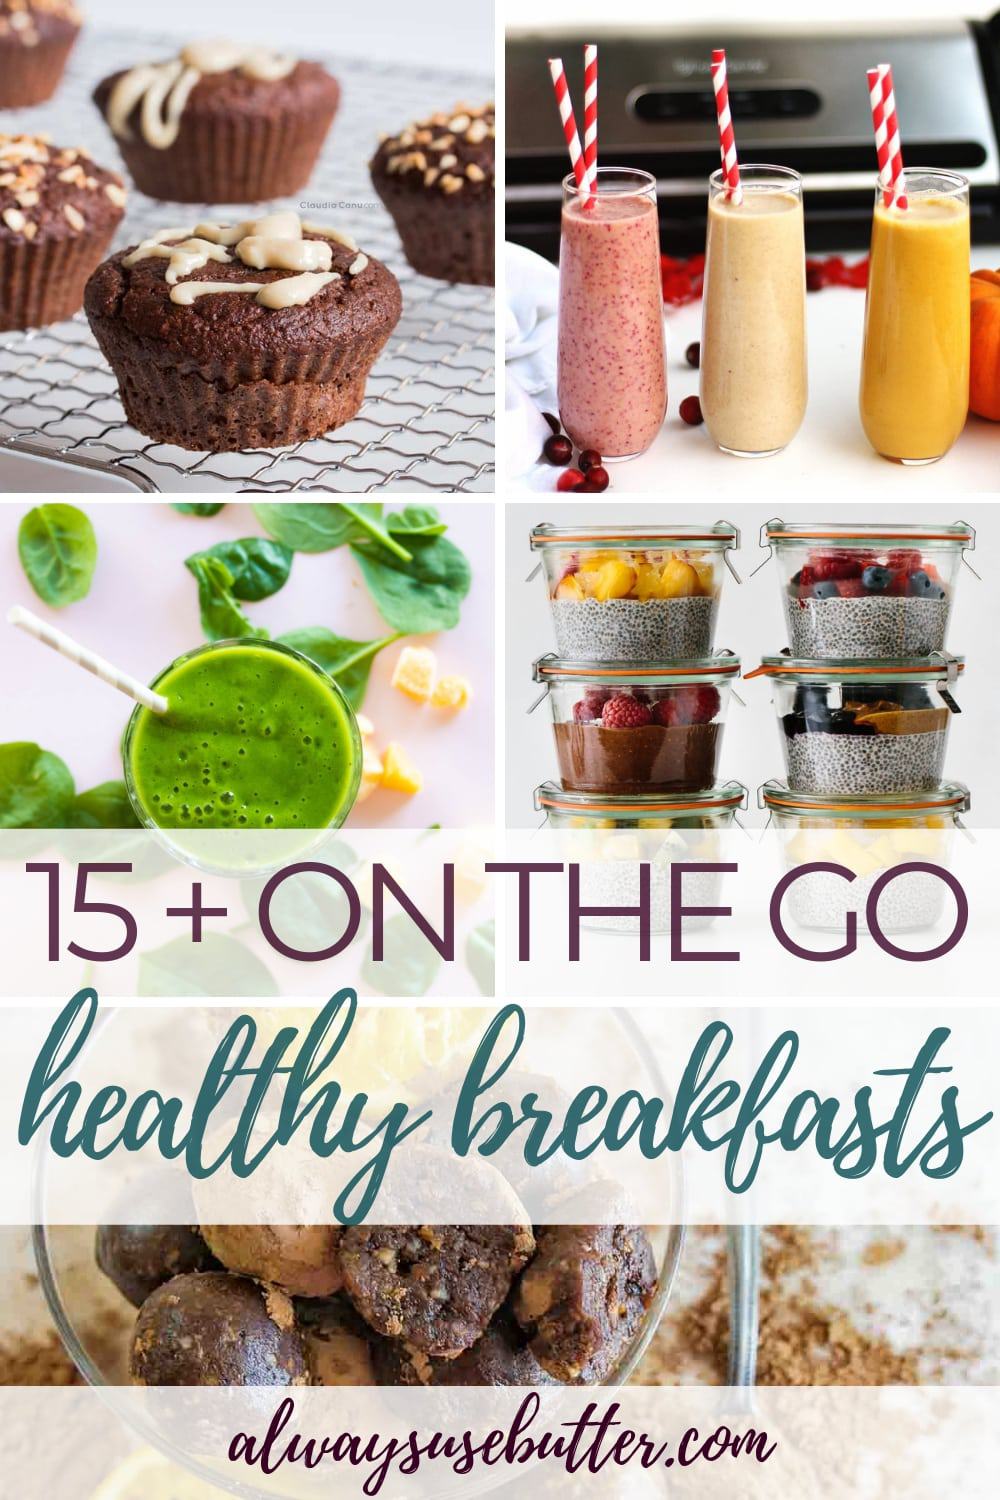 15+ Healthy Breakfasts To Go [Vegetarian & Low Carb] - always use butter